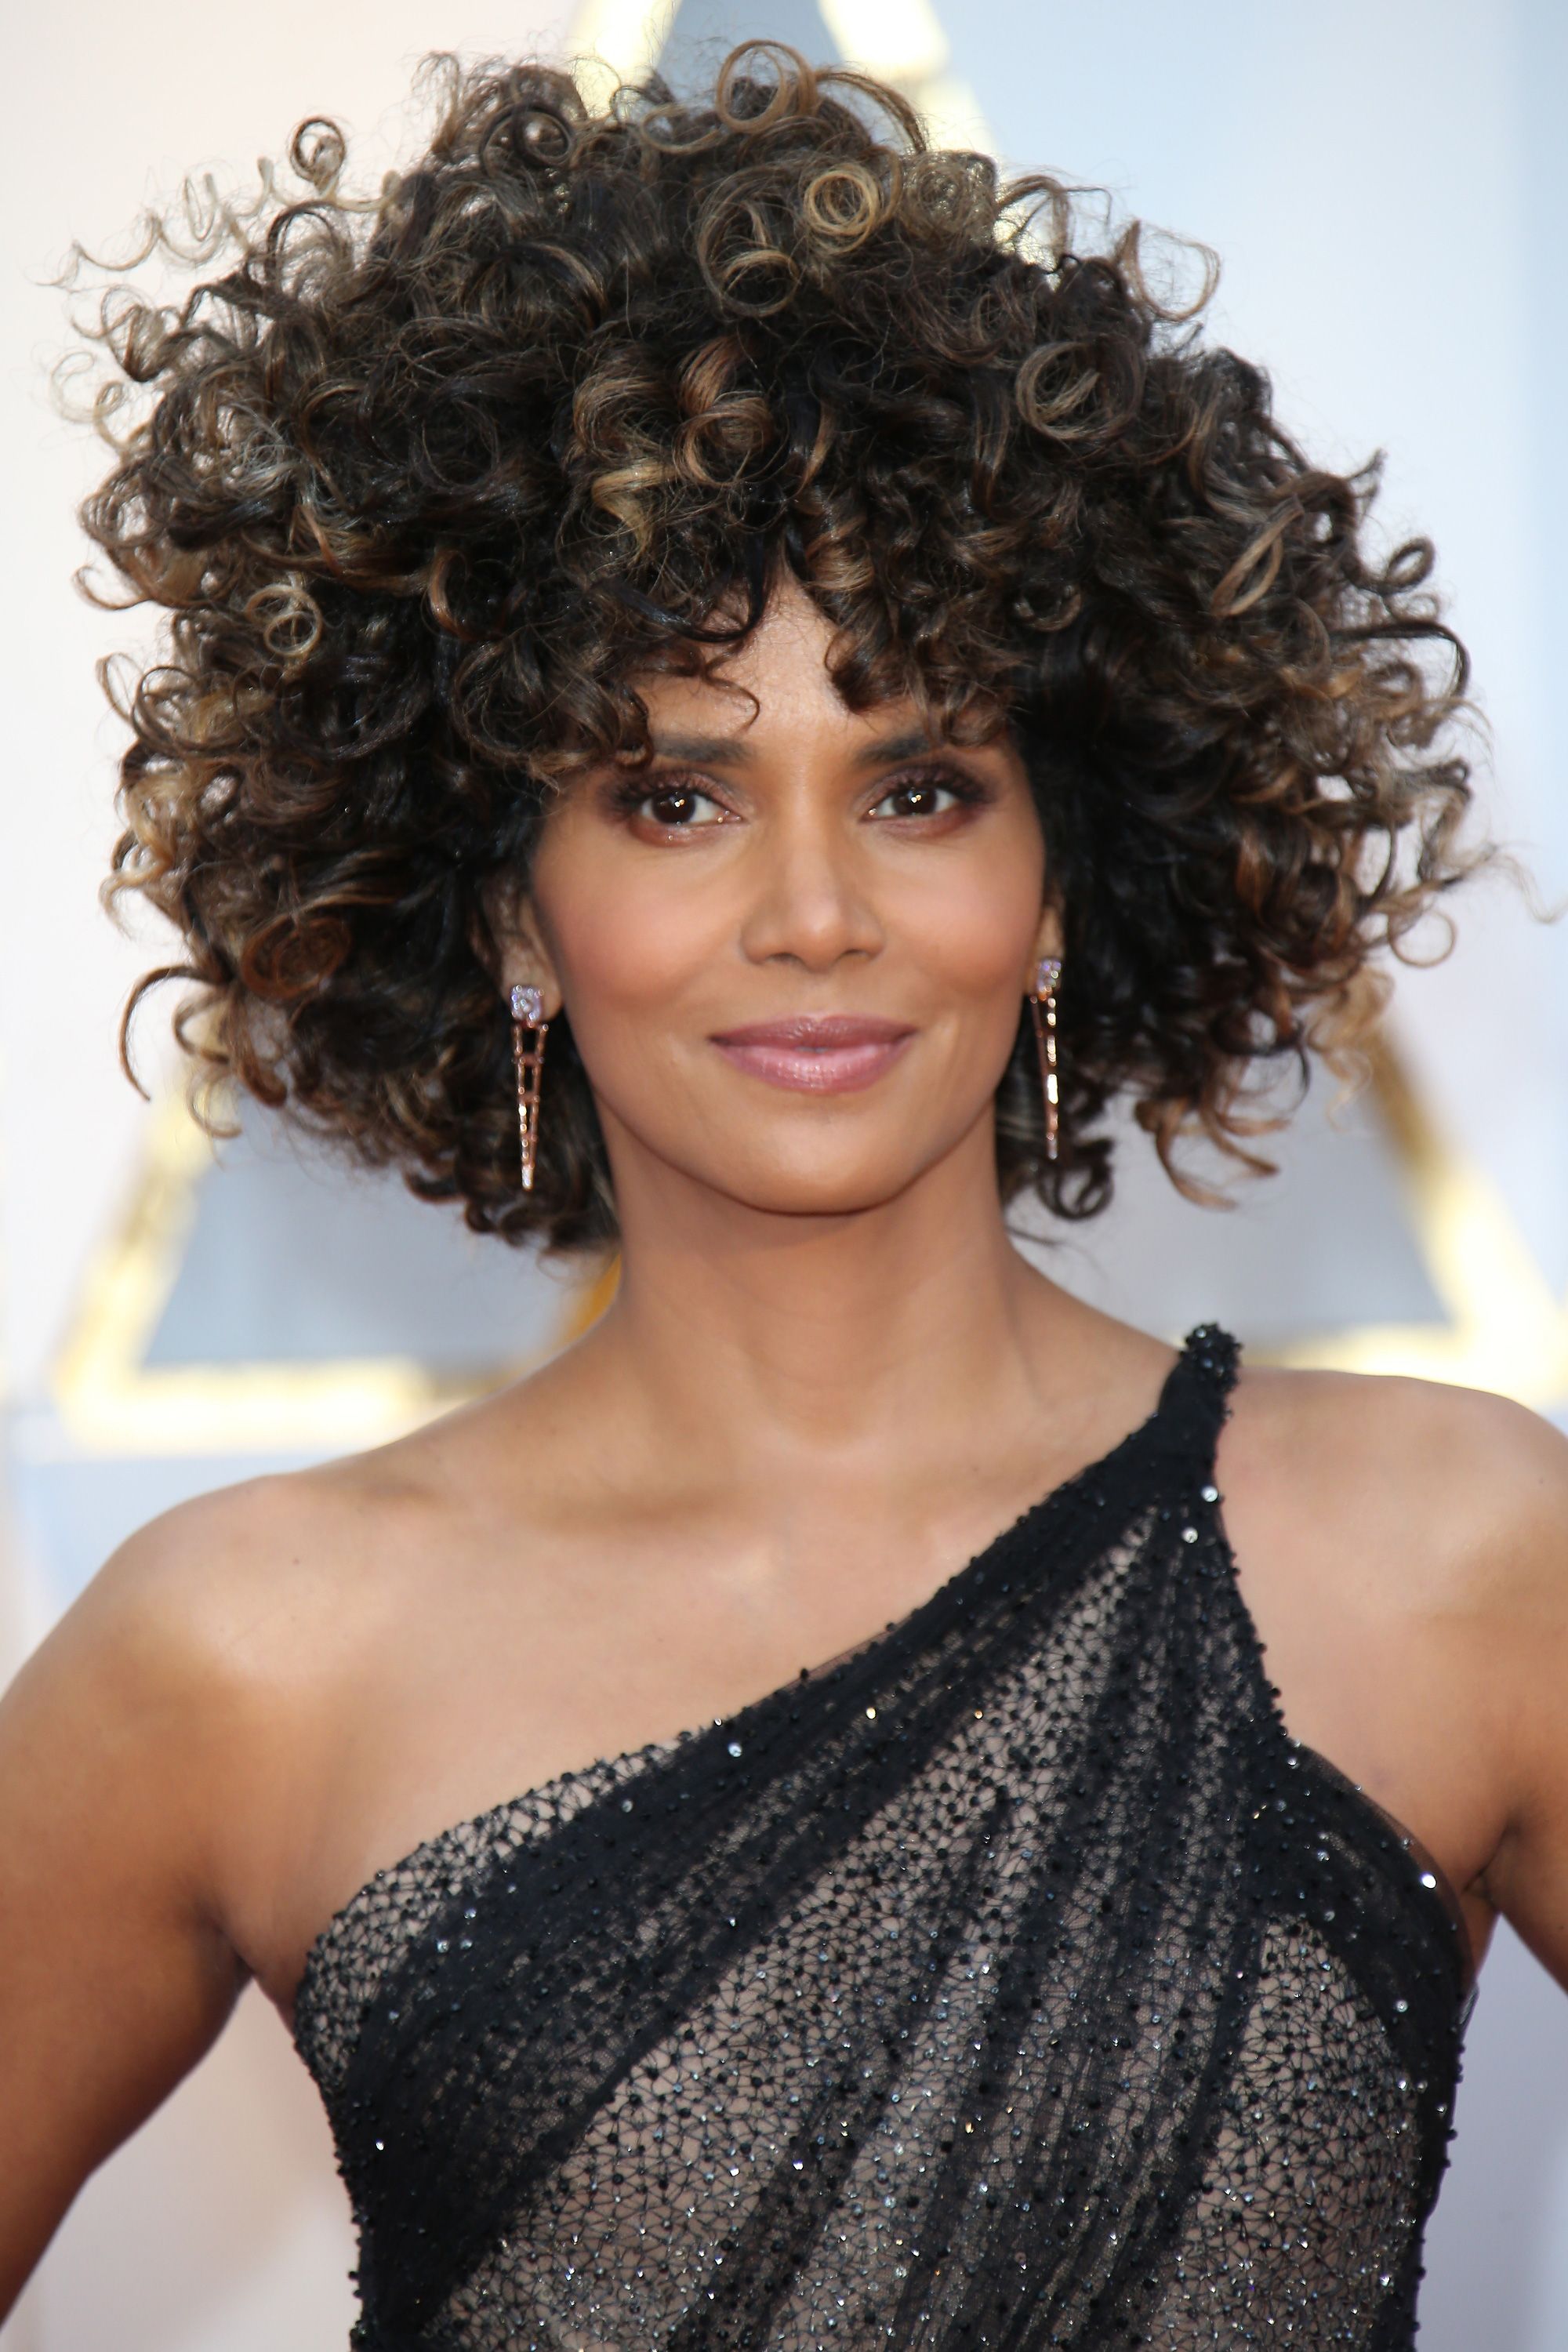 42 easy curly hairstyles - short, medium, and long haircuts